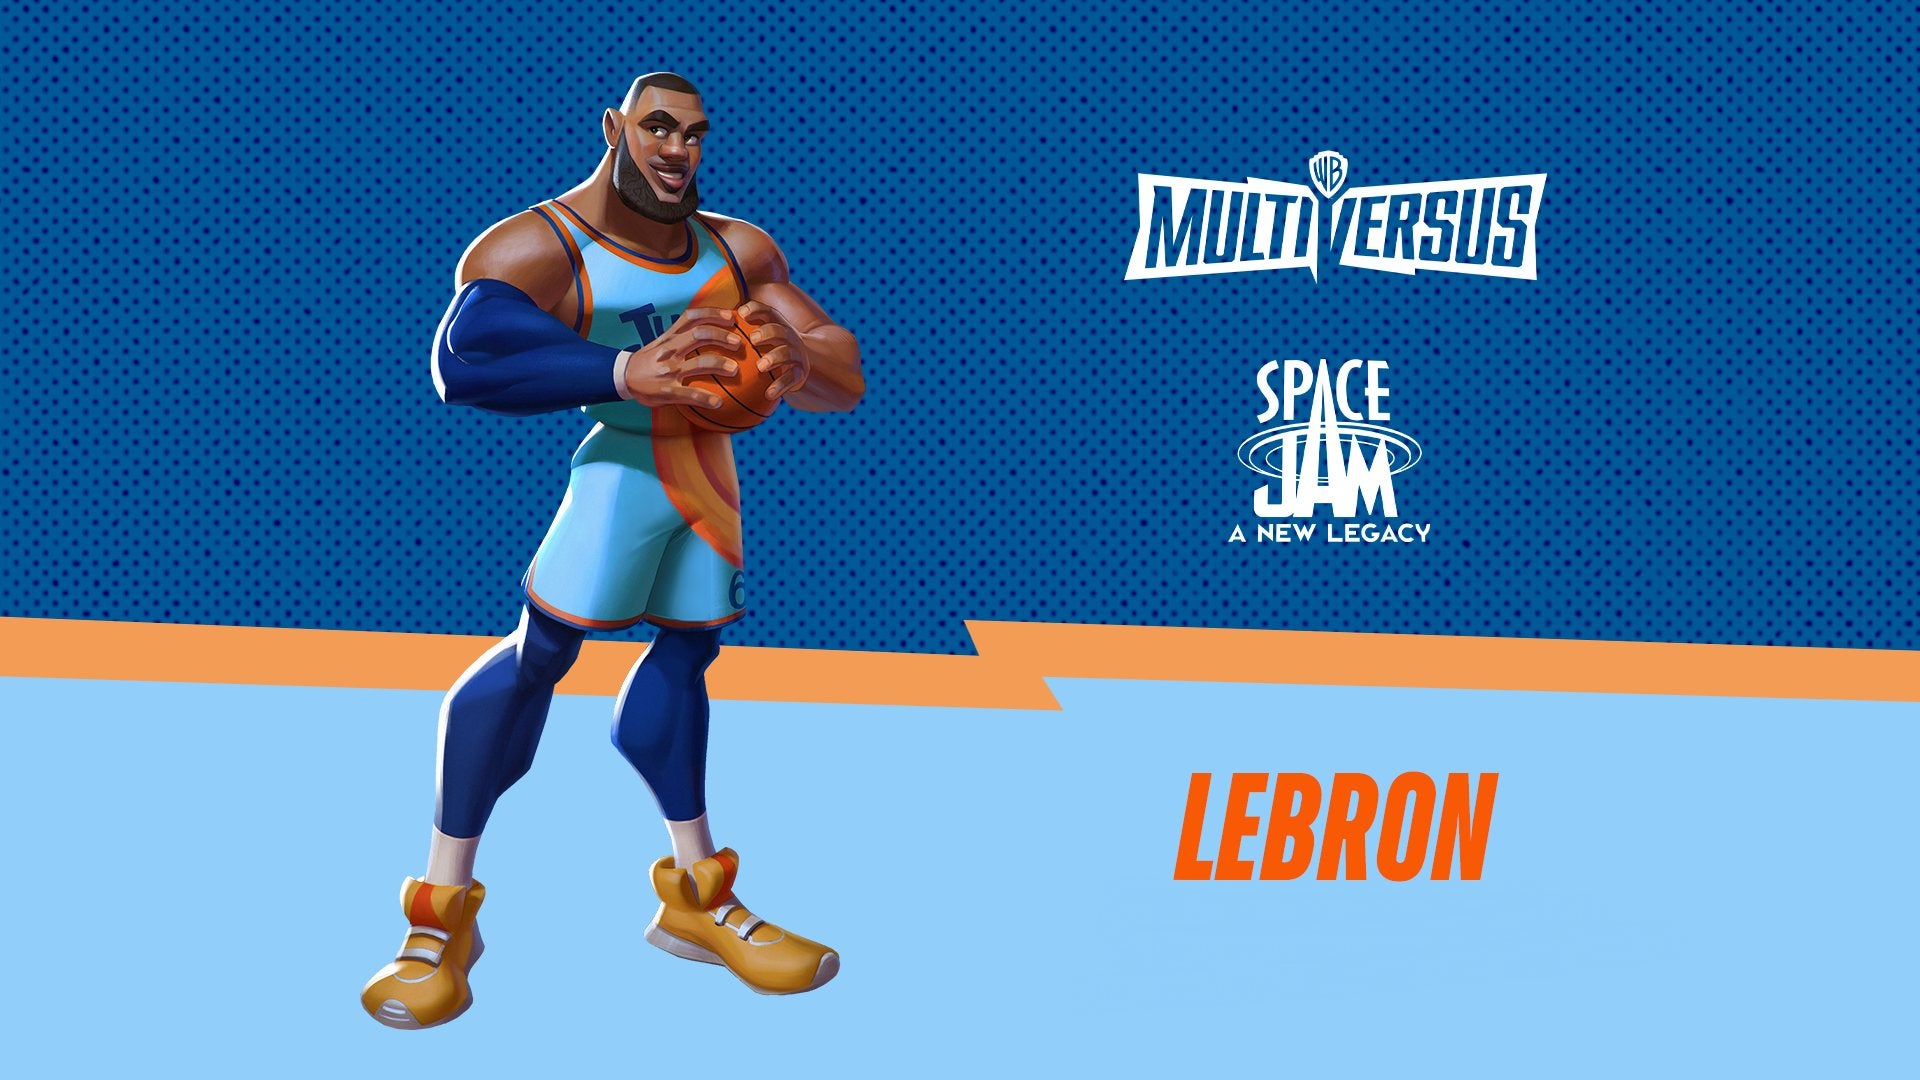 Image for MultiVersus has temporarily removed LeBron James from the game